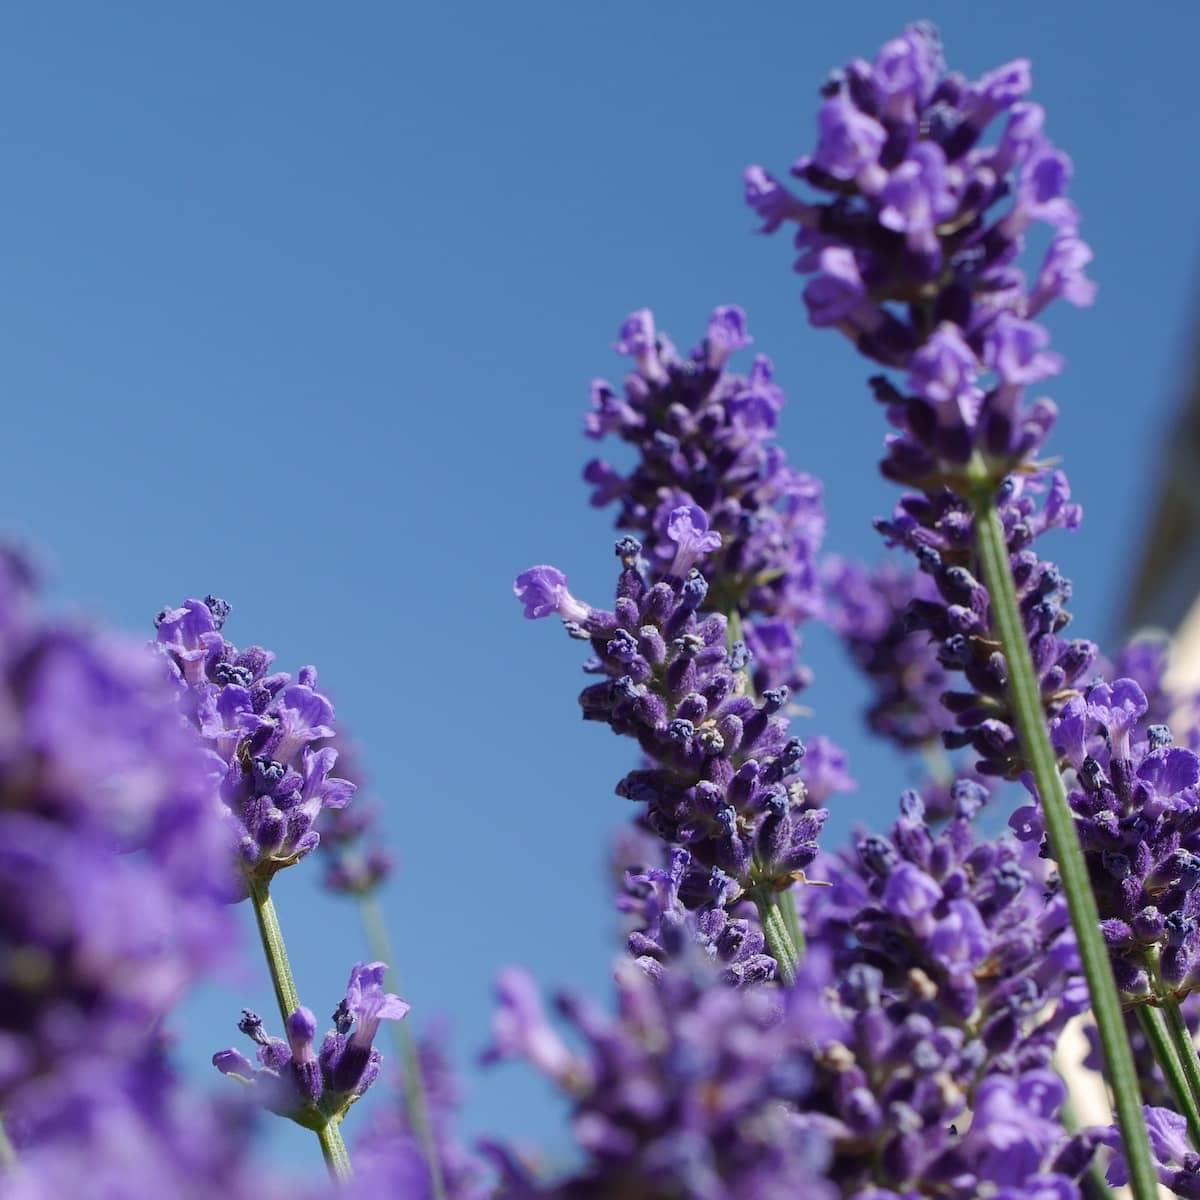 Purple lavender stems and buds in deep blue sky